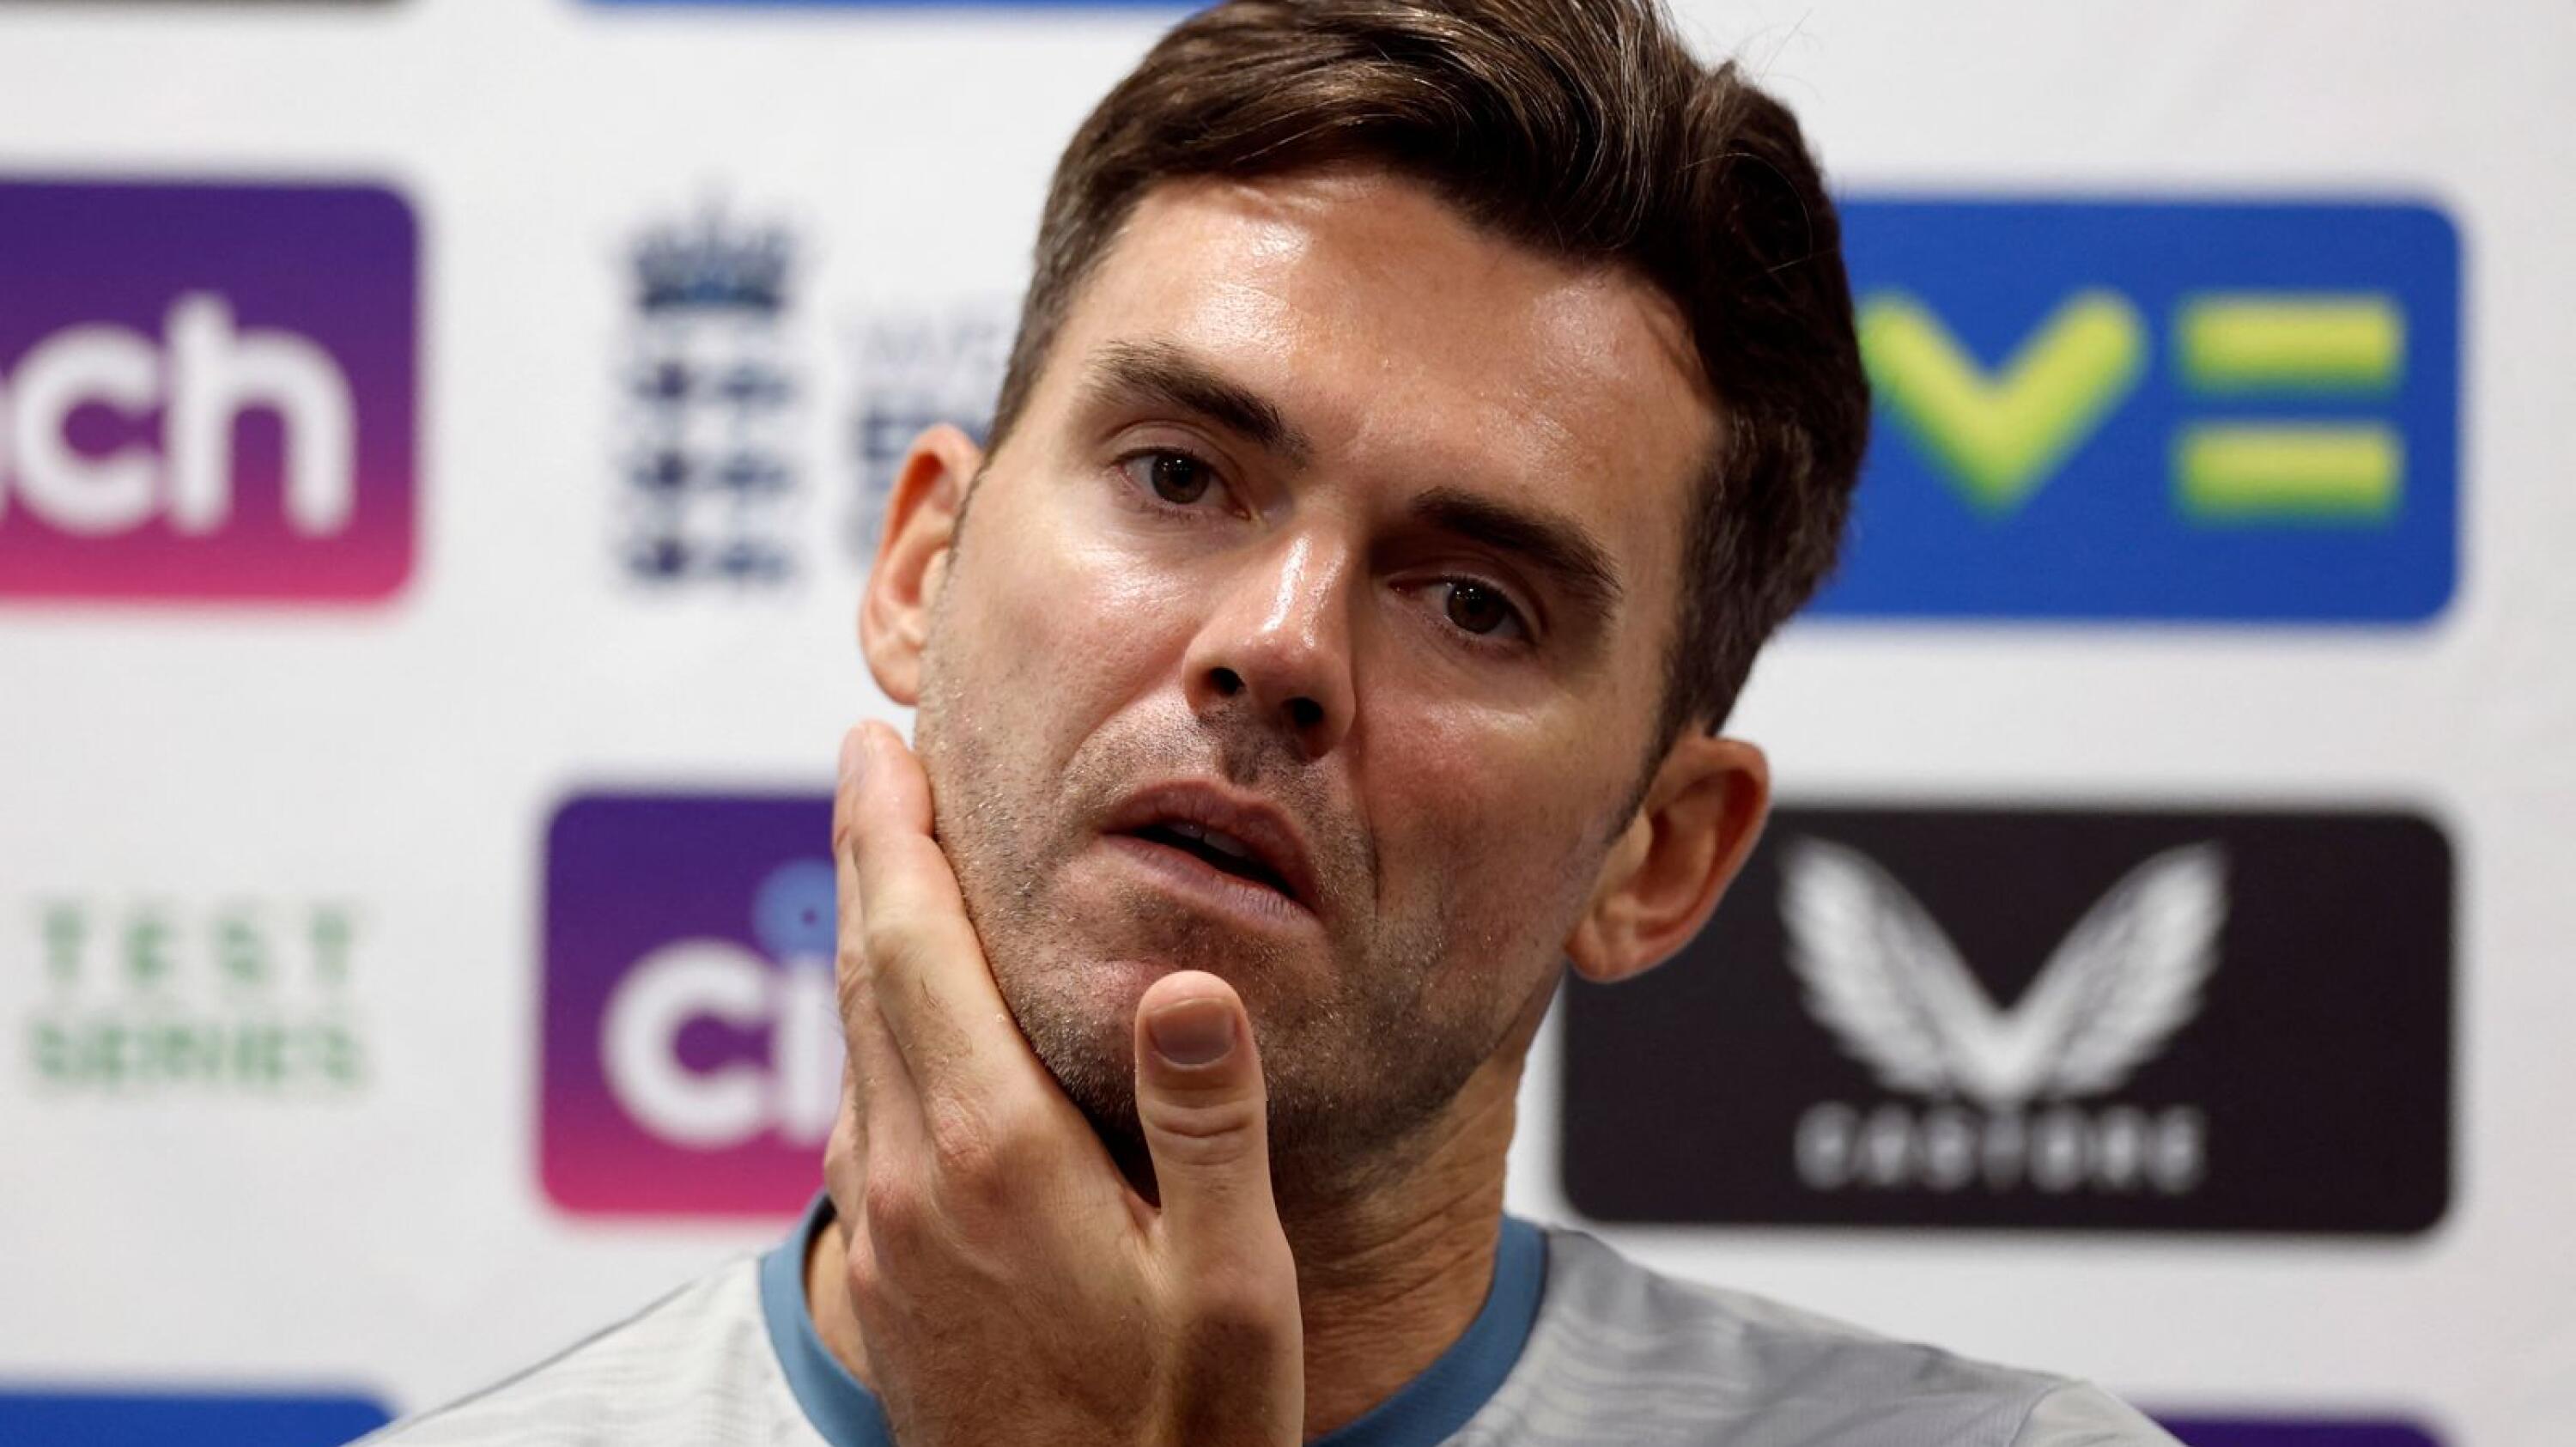 England's James Anderson speaks to the media during a press conference ahead of Wednesday’s first Test at Lord’s Cricket Ground against South Africa